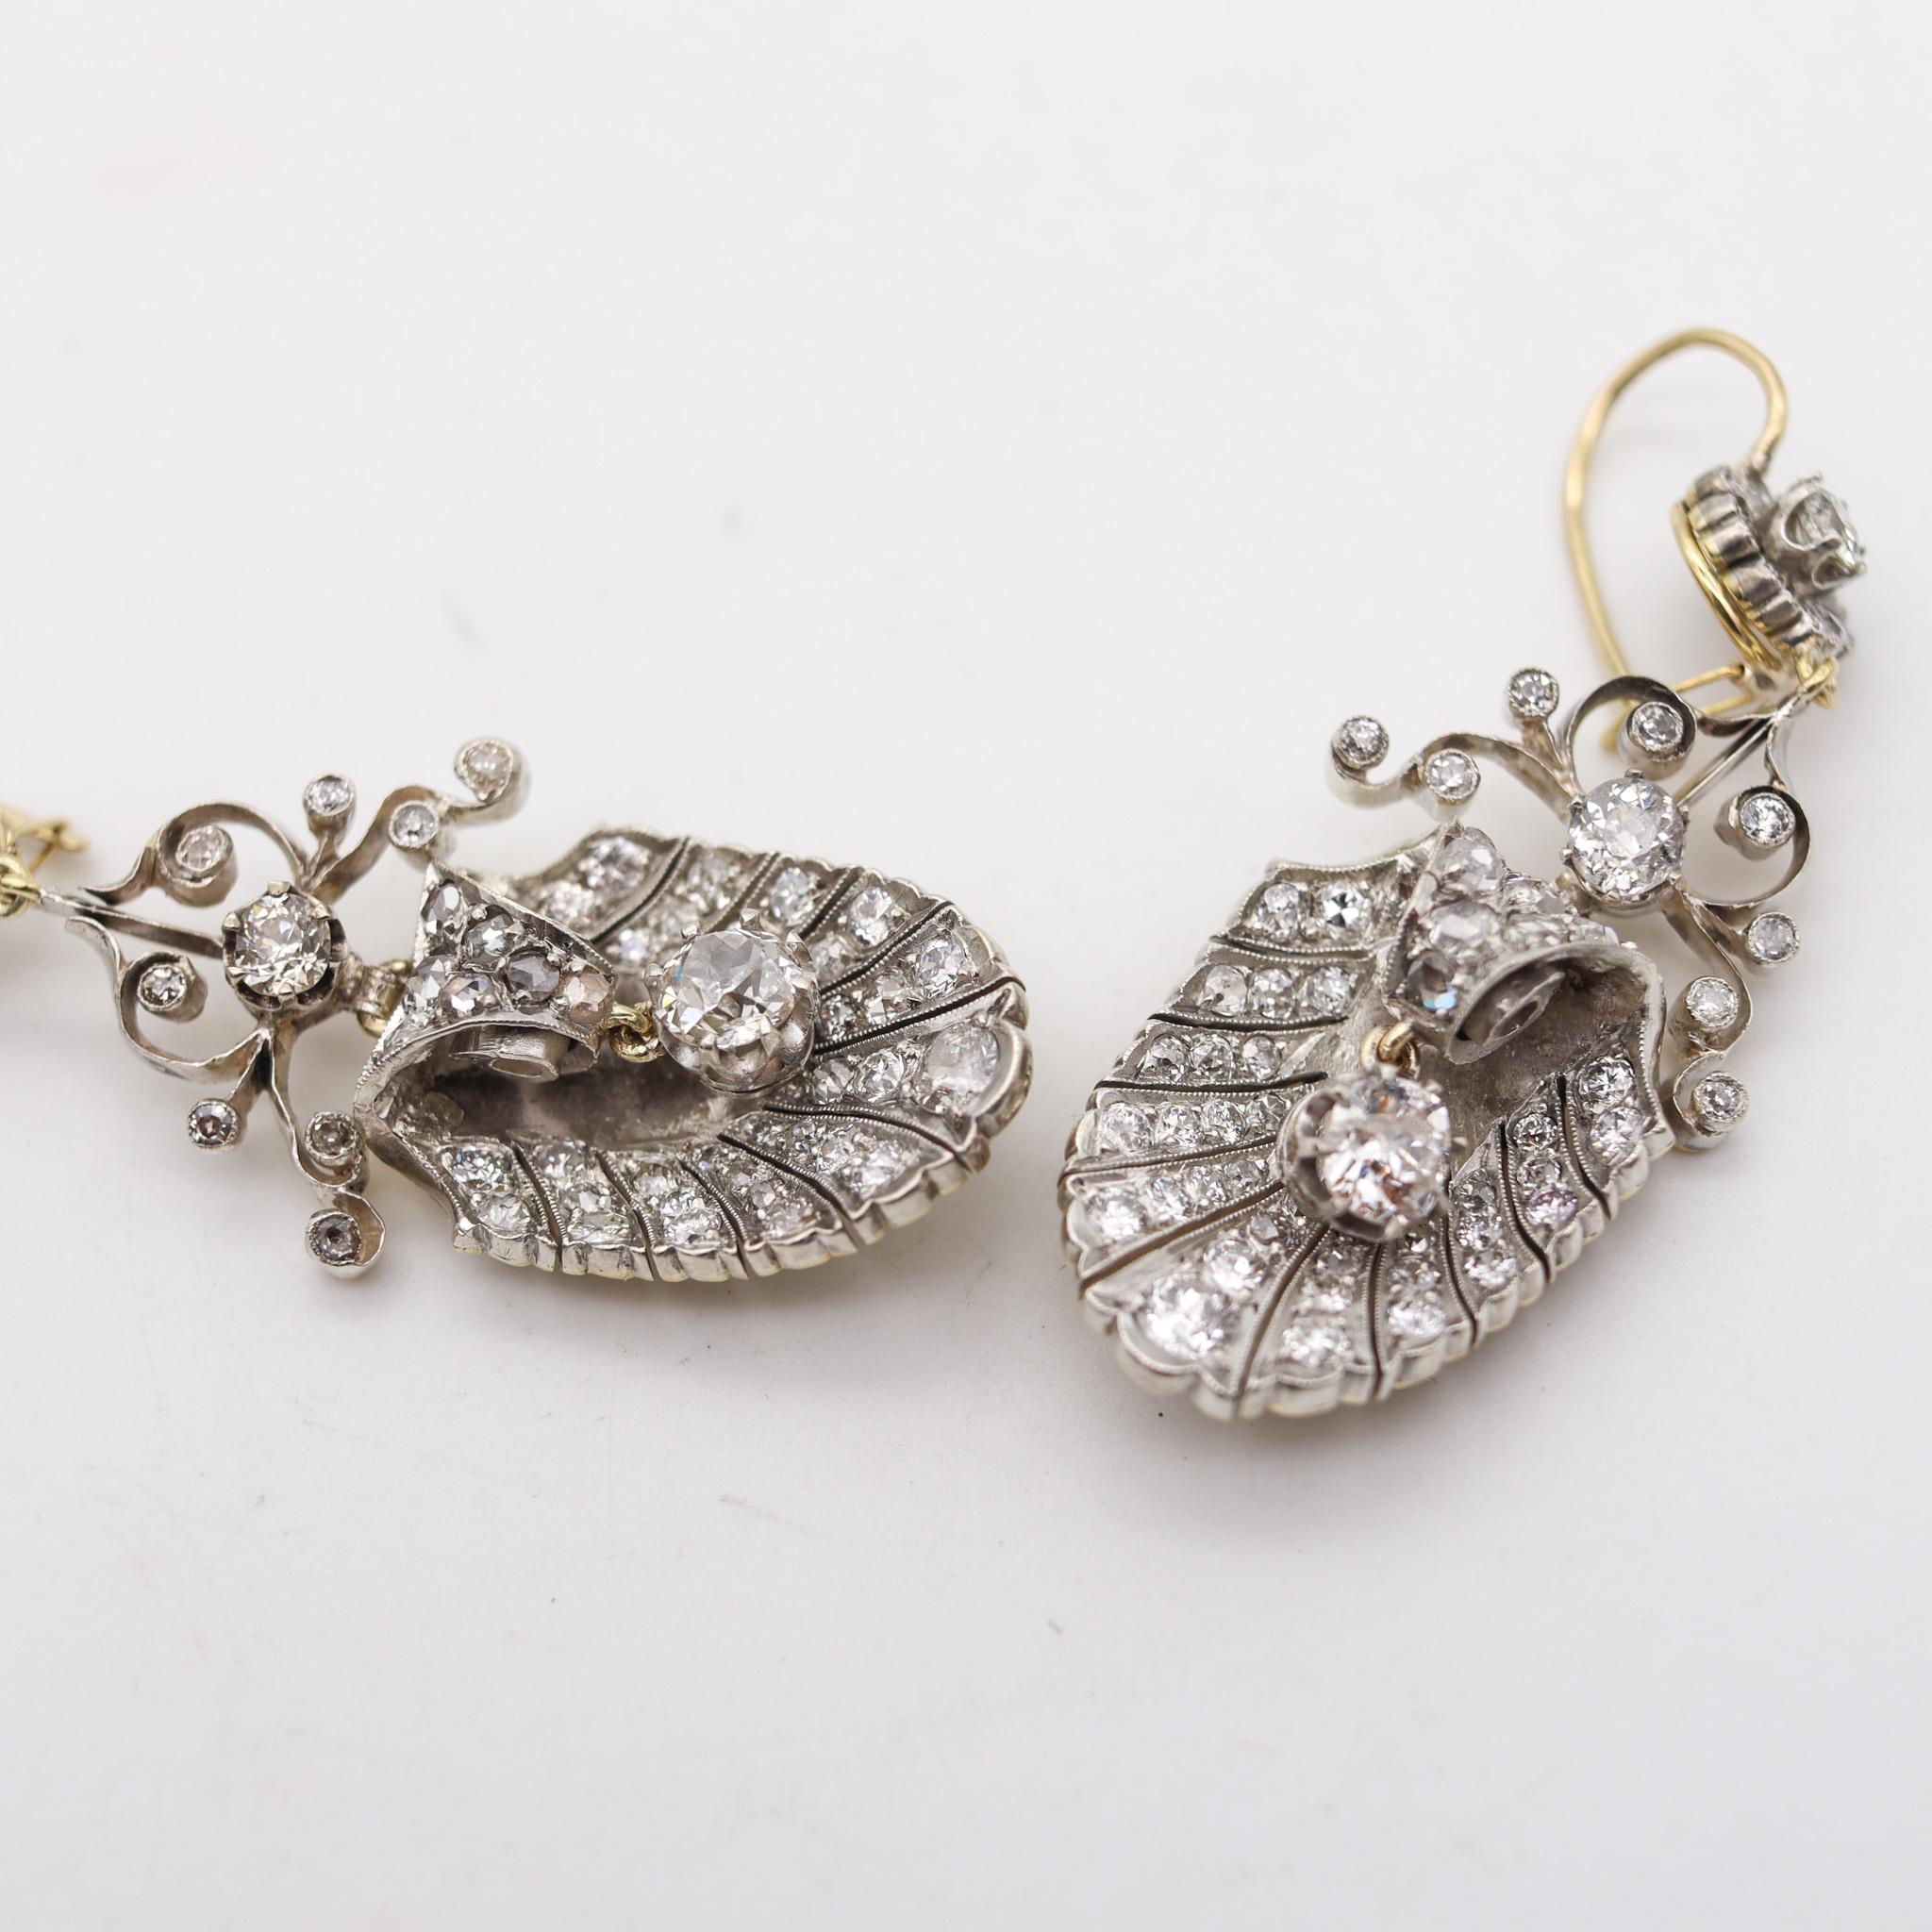 Rose Cut Georgian 1800 Antique Dangle Earrings In 15Kt Gold With 8.46 Ctw In Diamonds For Sale